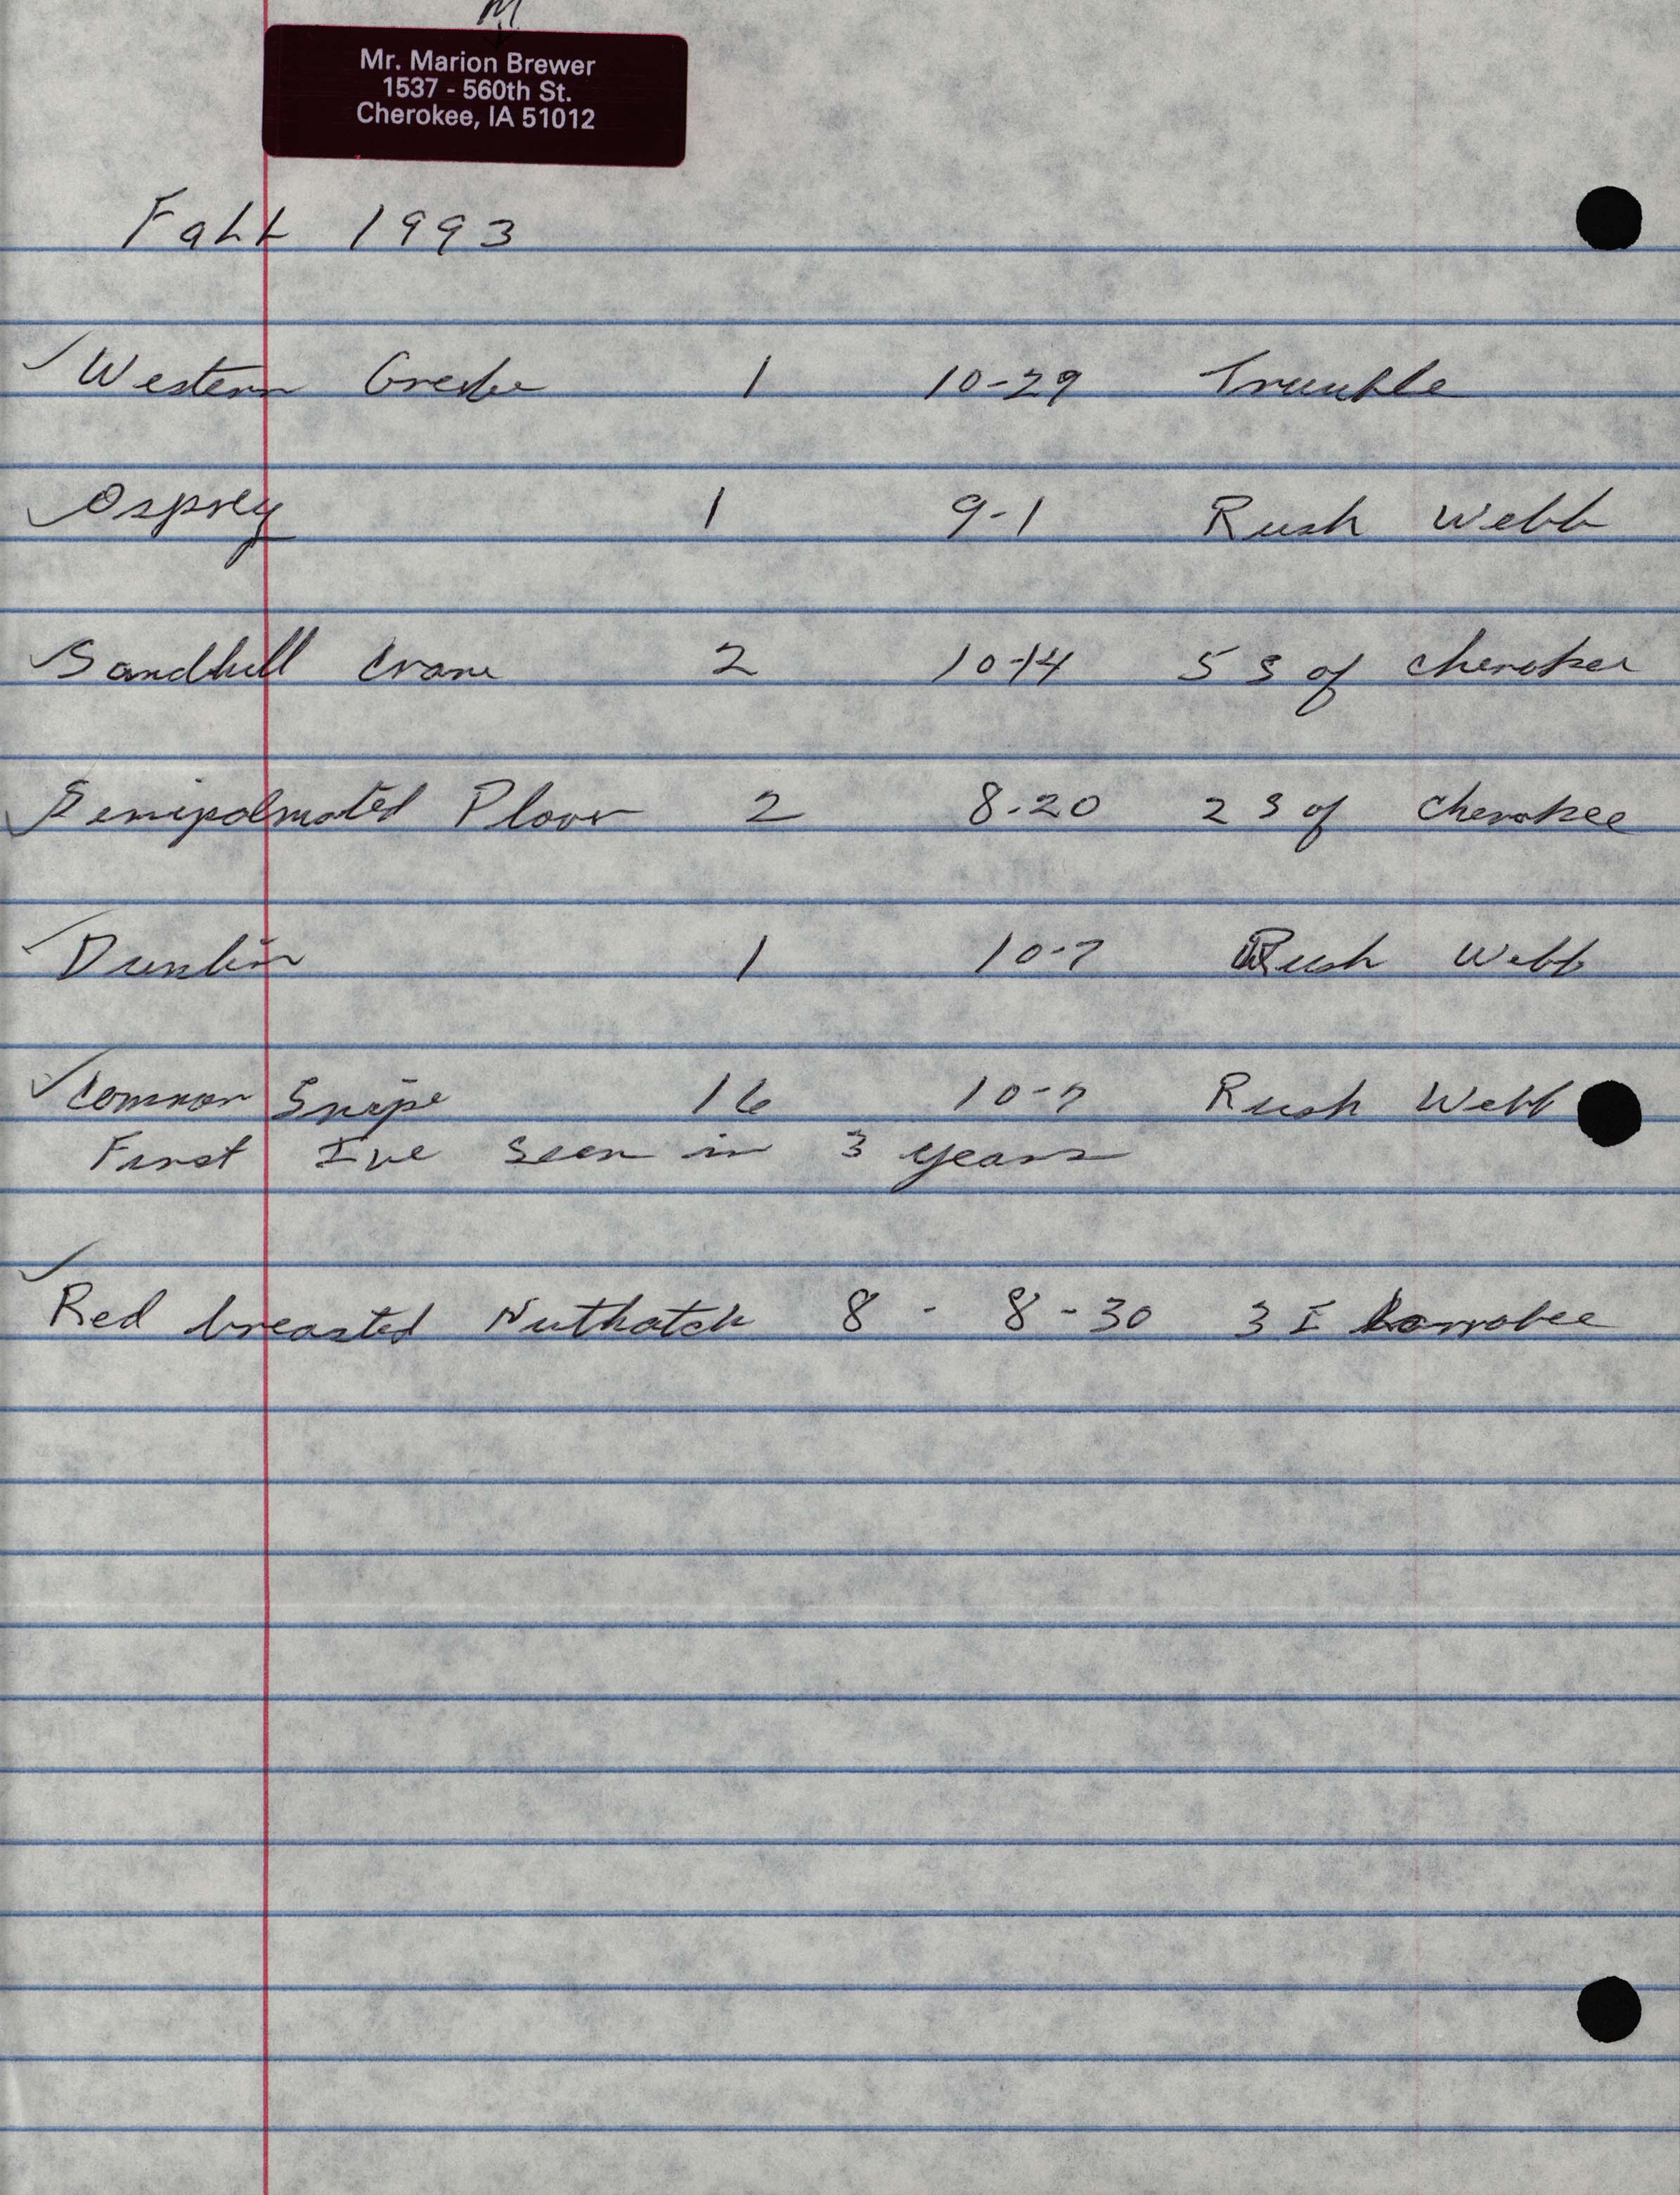 Field notes contributed by Marion M. Brewer, fall 1993